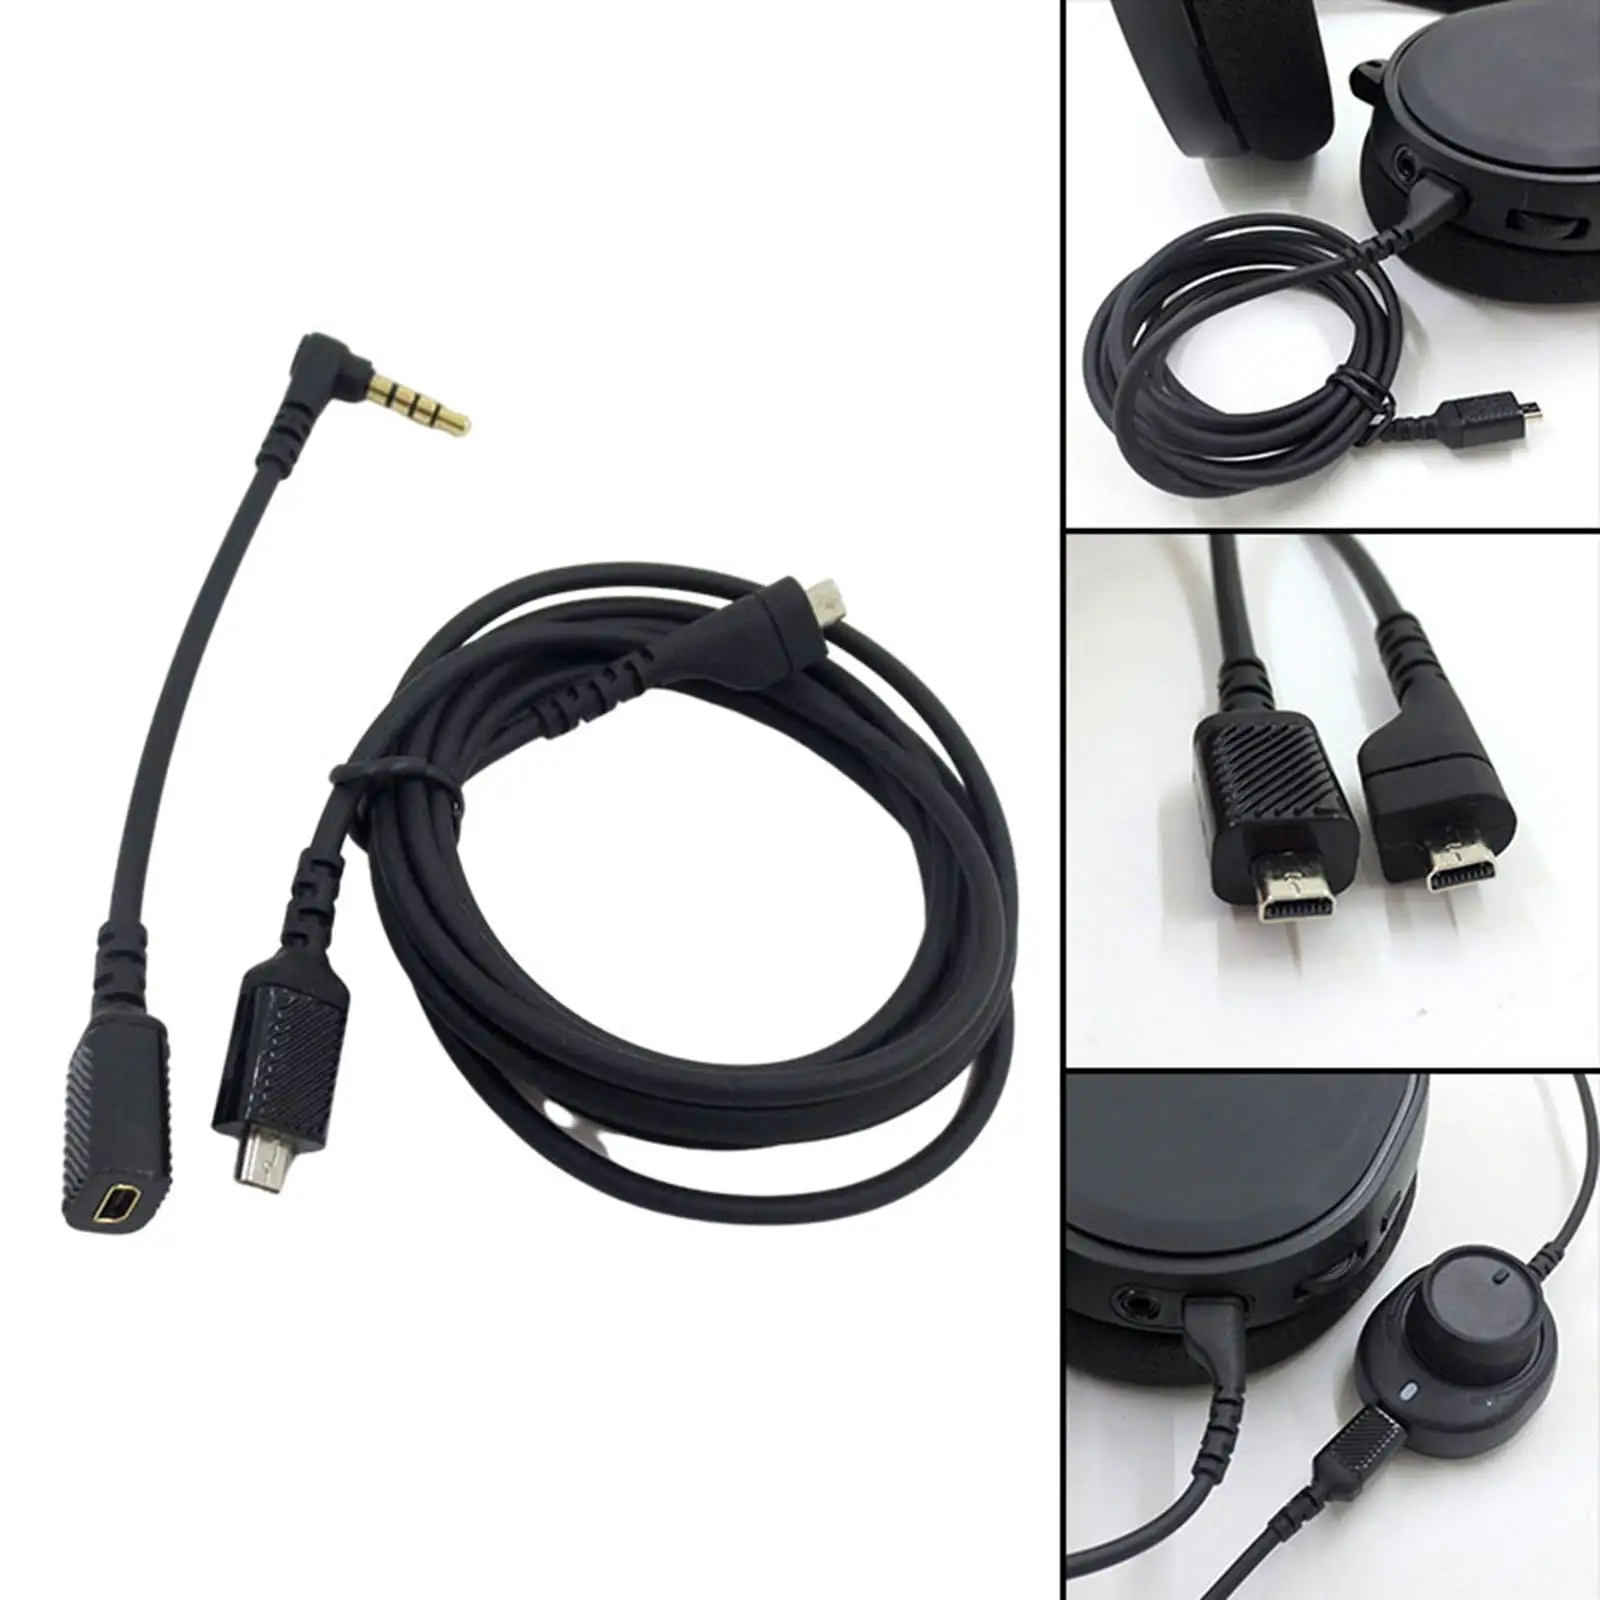 Audio Adapter Cable Headphone Converter Line Cord for Arctis 3 5 7 PC Laptop Accessories